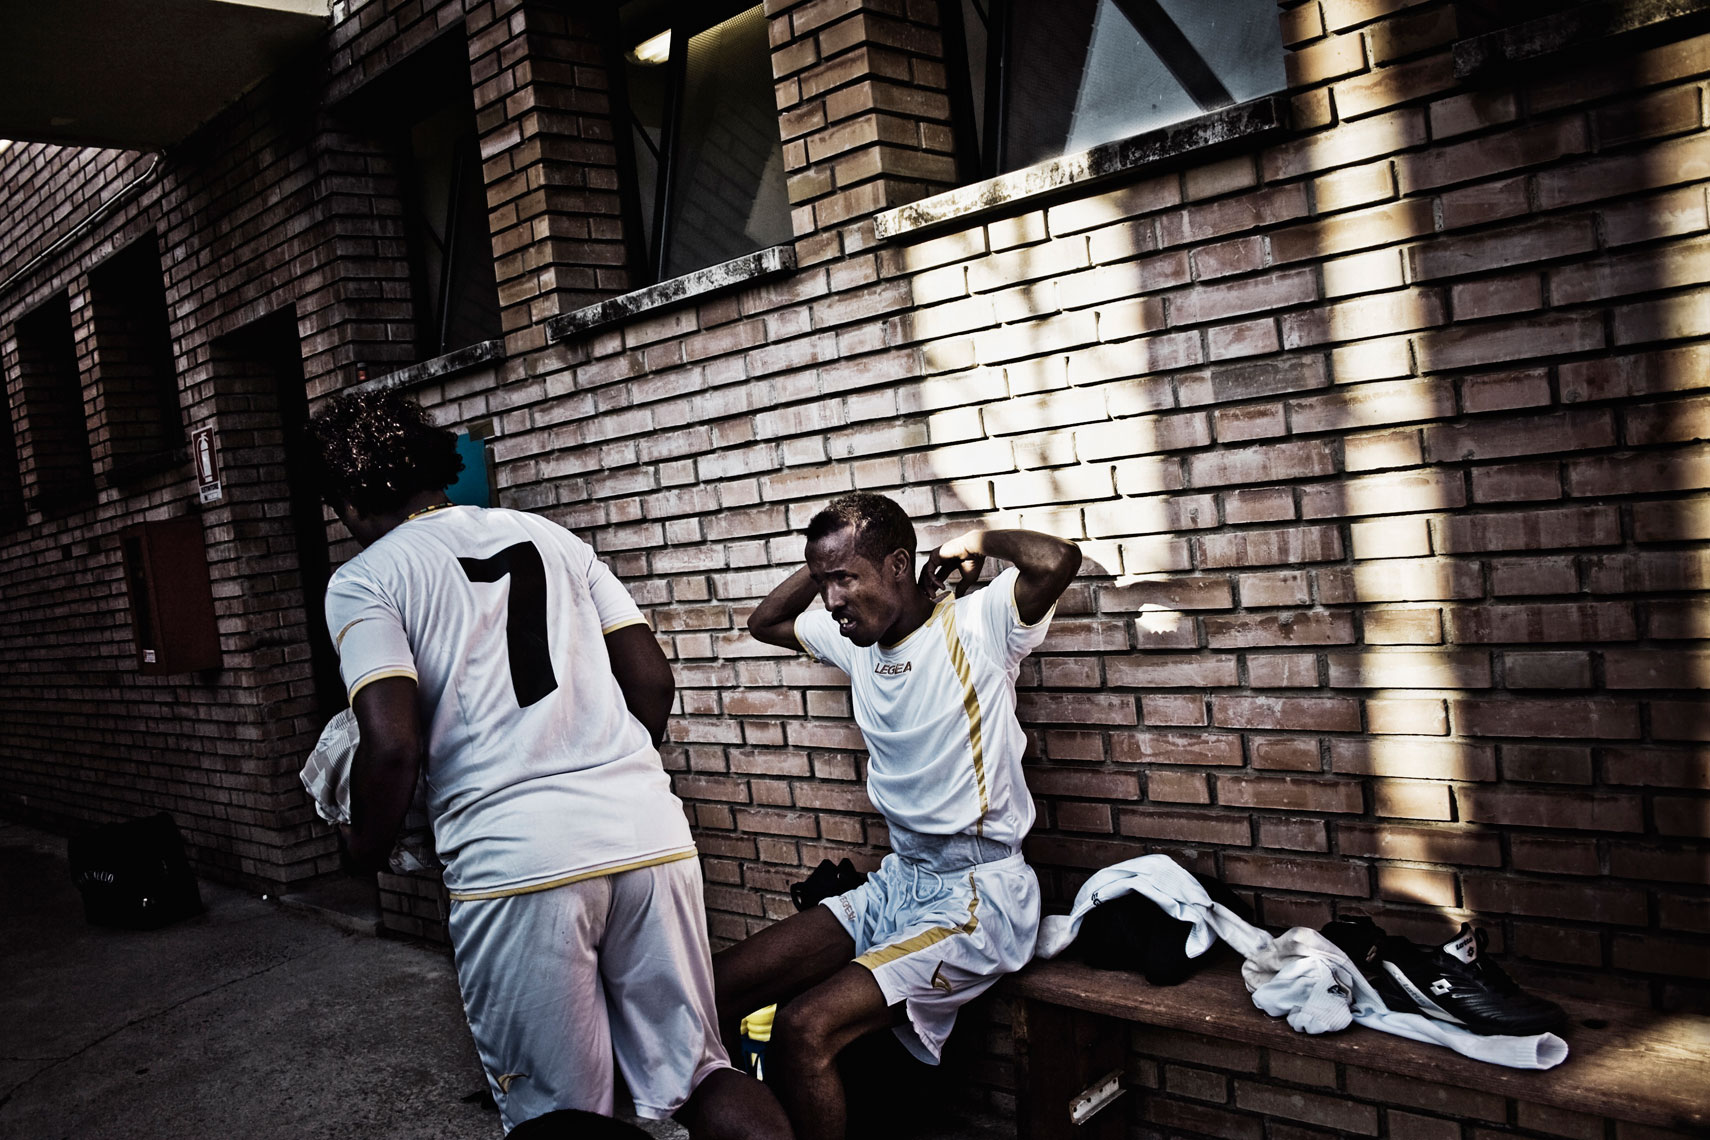 ITALY. Casalecchio di Reno, Bologna, 8th July 2010. During the "Anti-Racist World Cup". Two of the members of a soccer team composed by Somali refugees who are living in a shelter for refugees located in the building of the former "Hotel Real" in the outskirts of Florence.